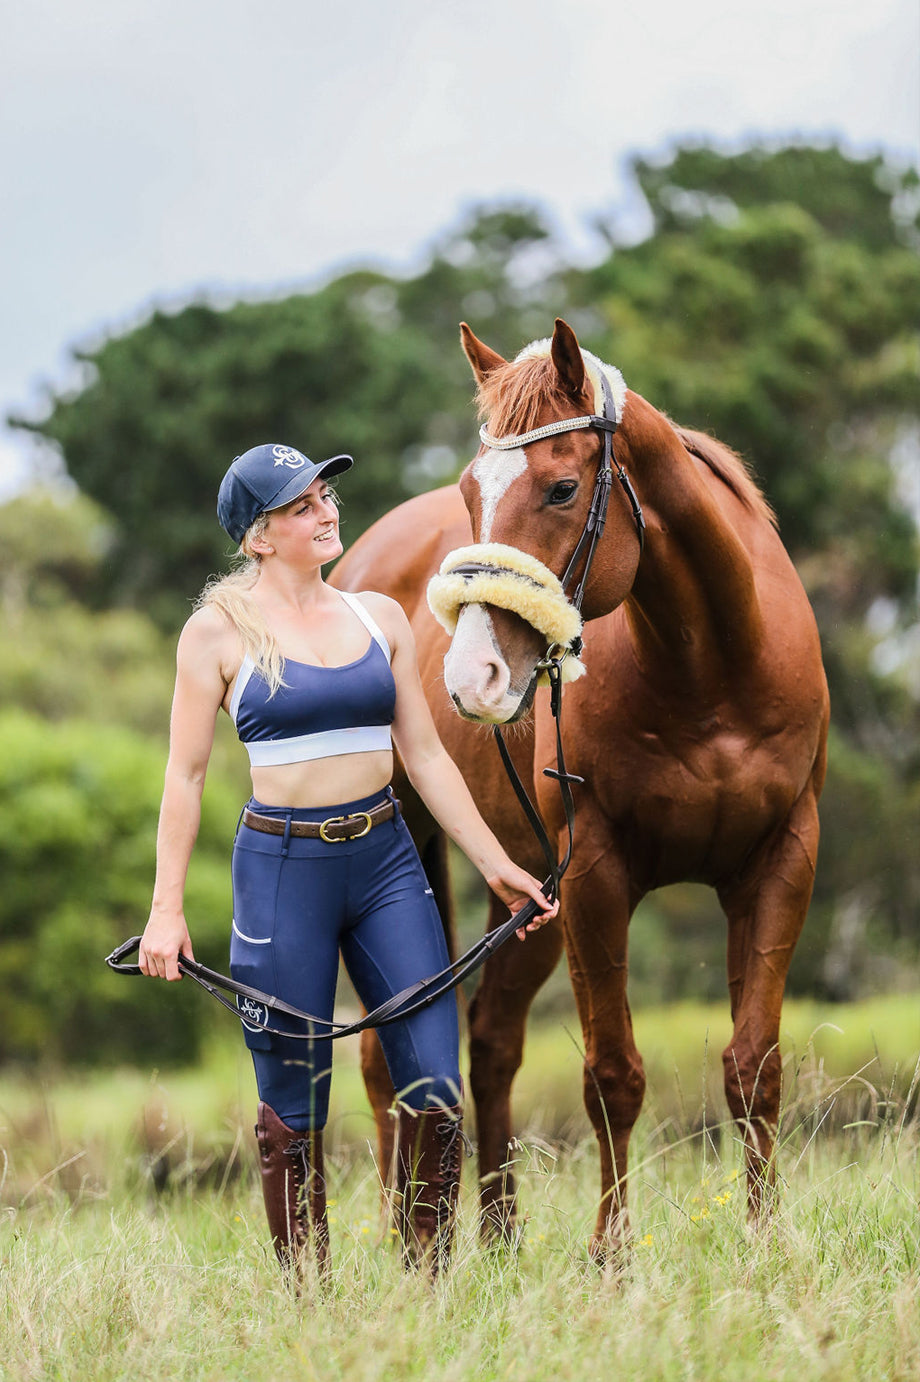 What is the Best Sports Bra for Horse Riding? – SportsBra